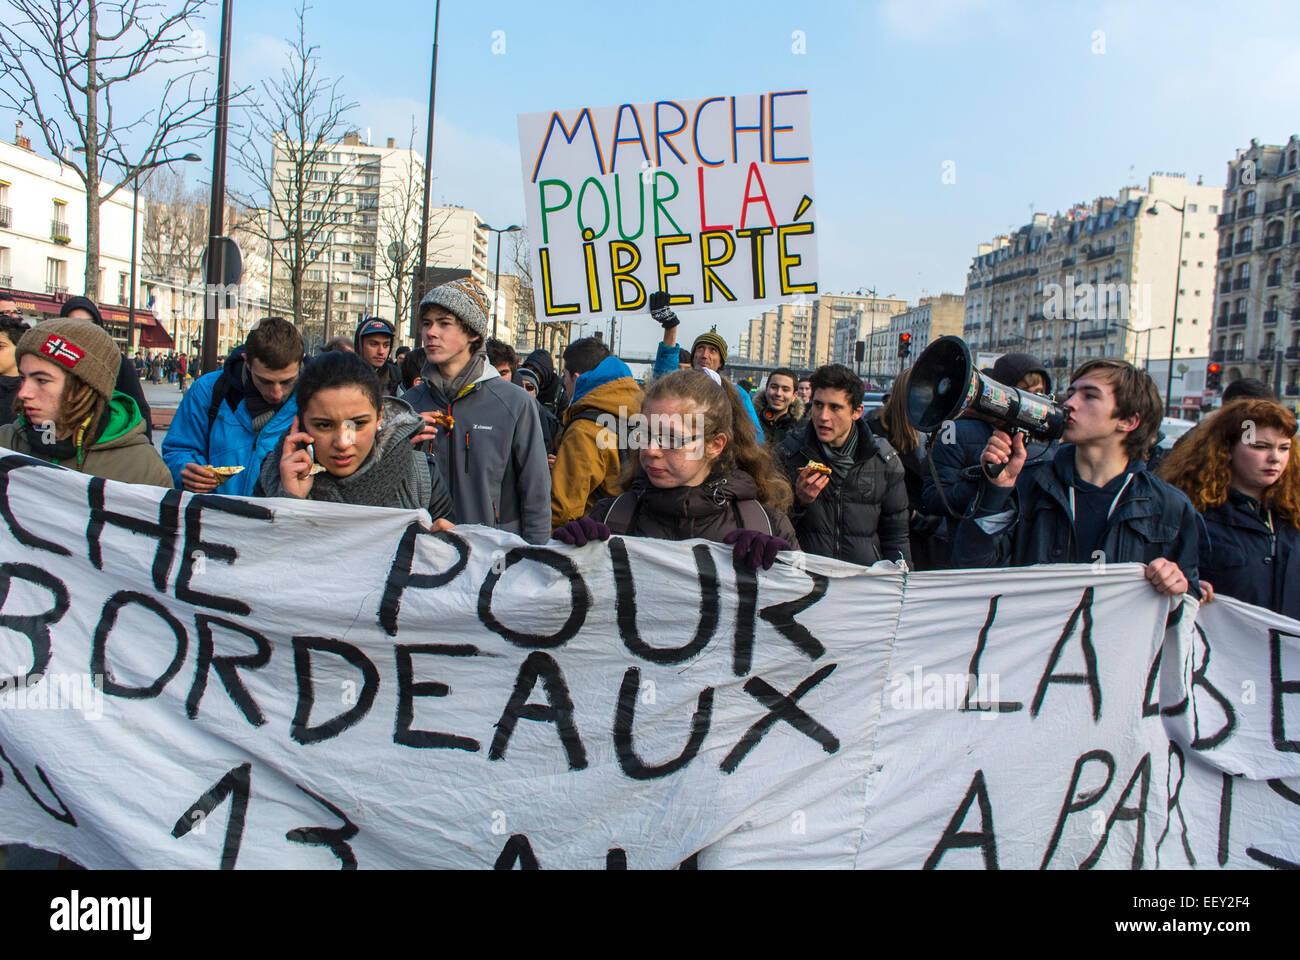 Paris, France French Hi-gh School Students March from Bordeaux in Support of 'Charlie Hebdo' Shooting Attack, Teenagers Holding Banners, Student Protests Stock Photo